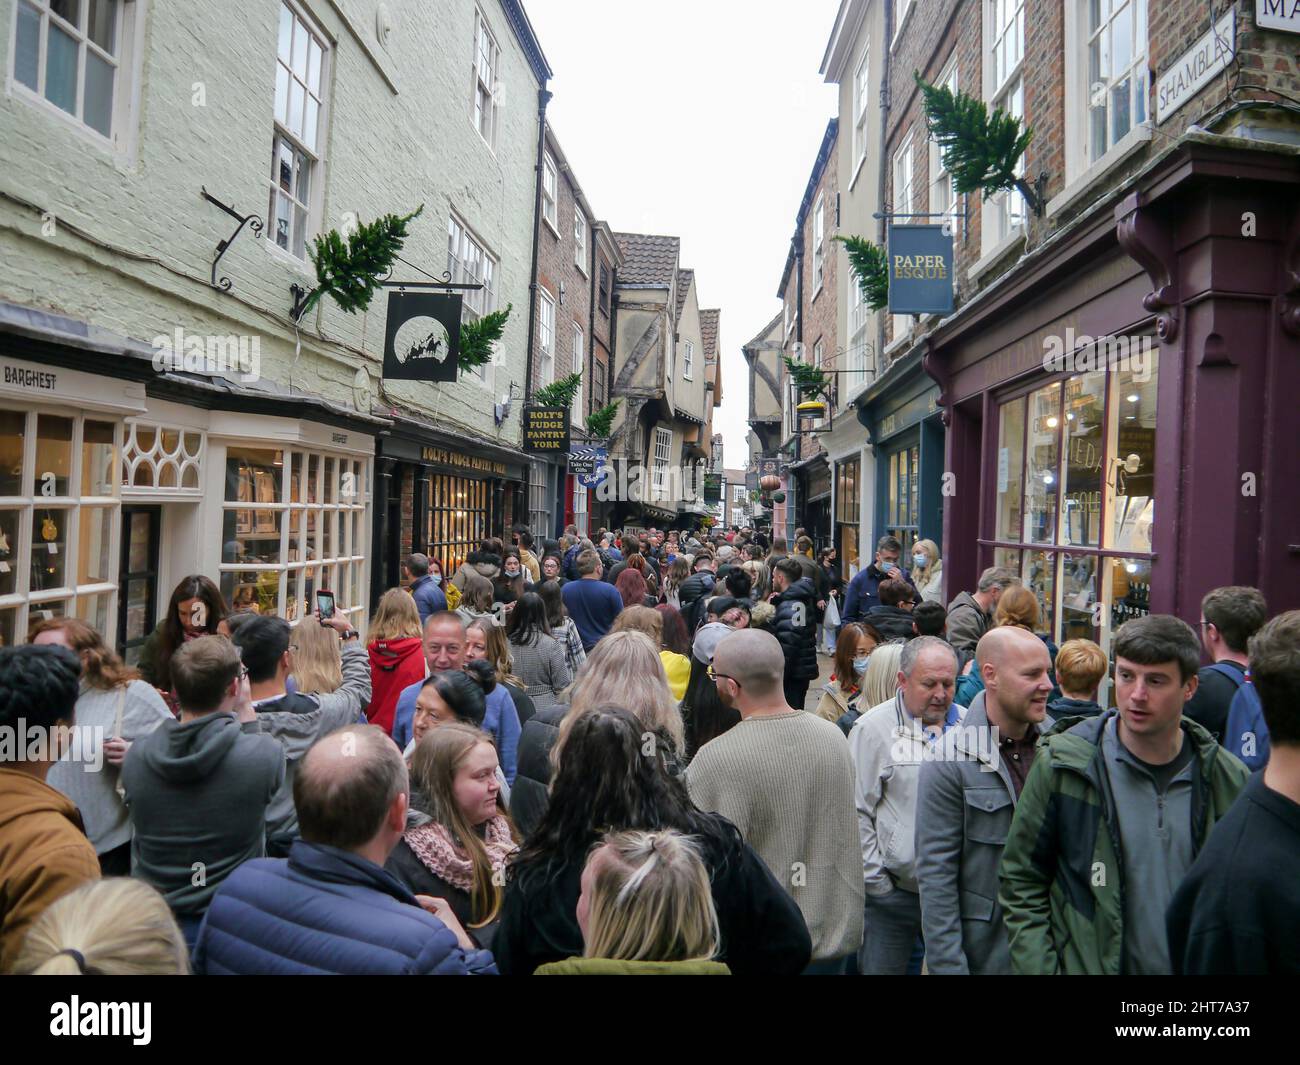 Crowds of people in the shambles, York, England Stock Photo